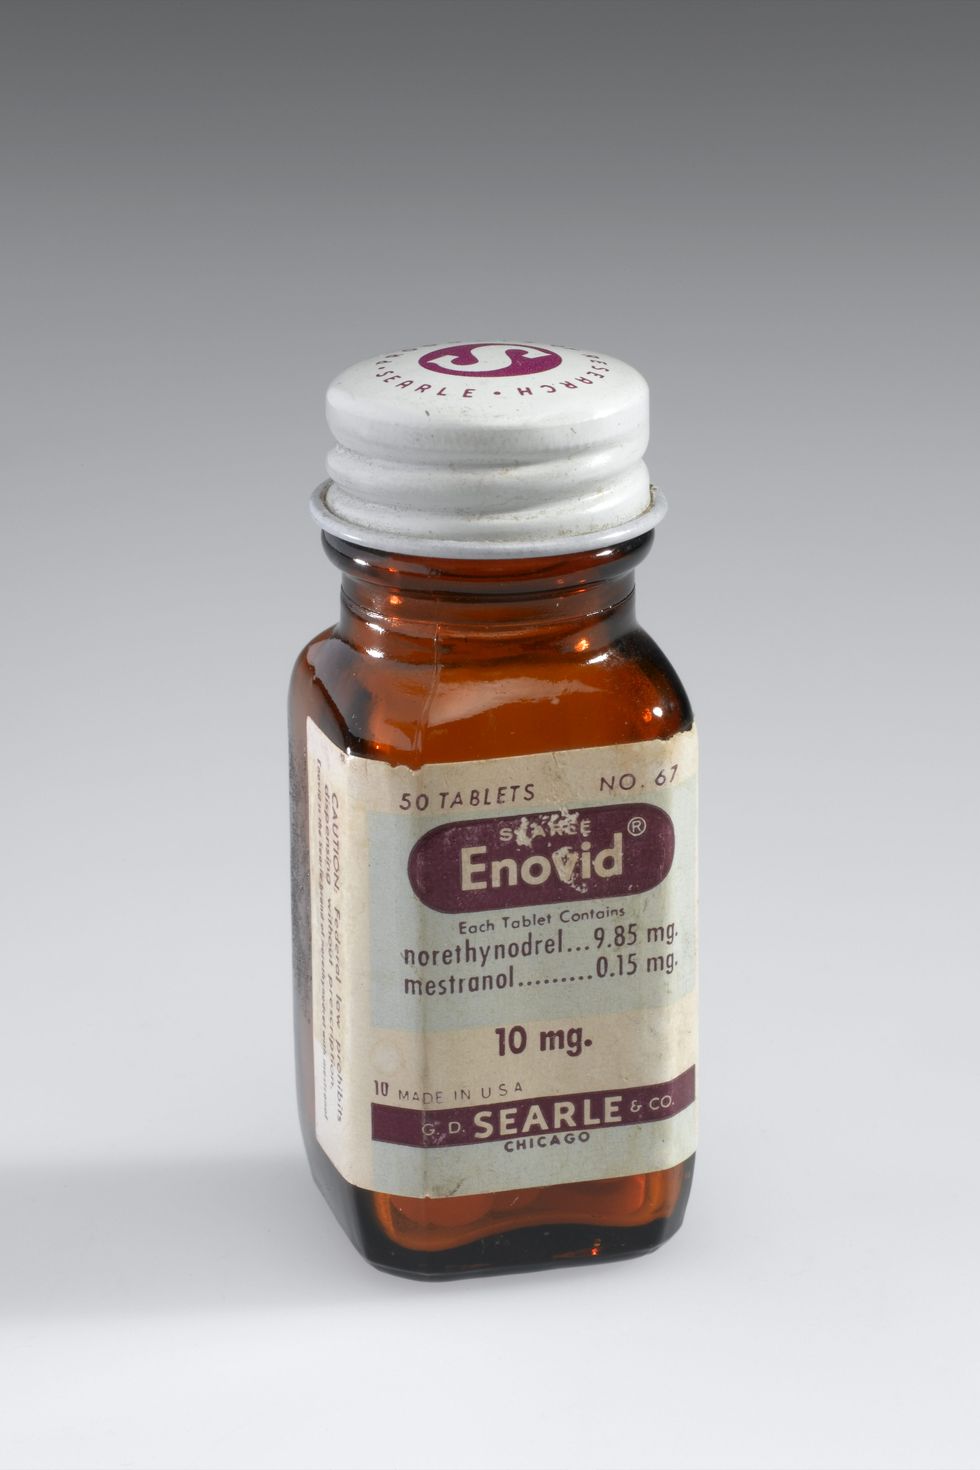 product, extract, a bottle of enovid birth control pills